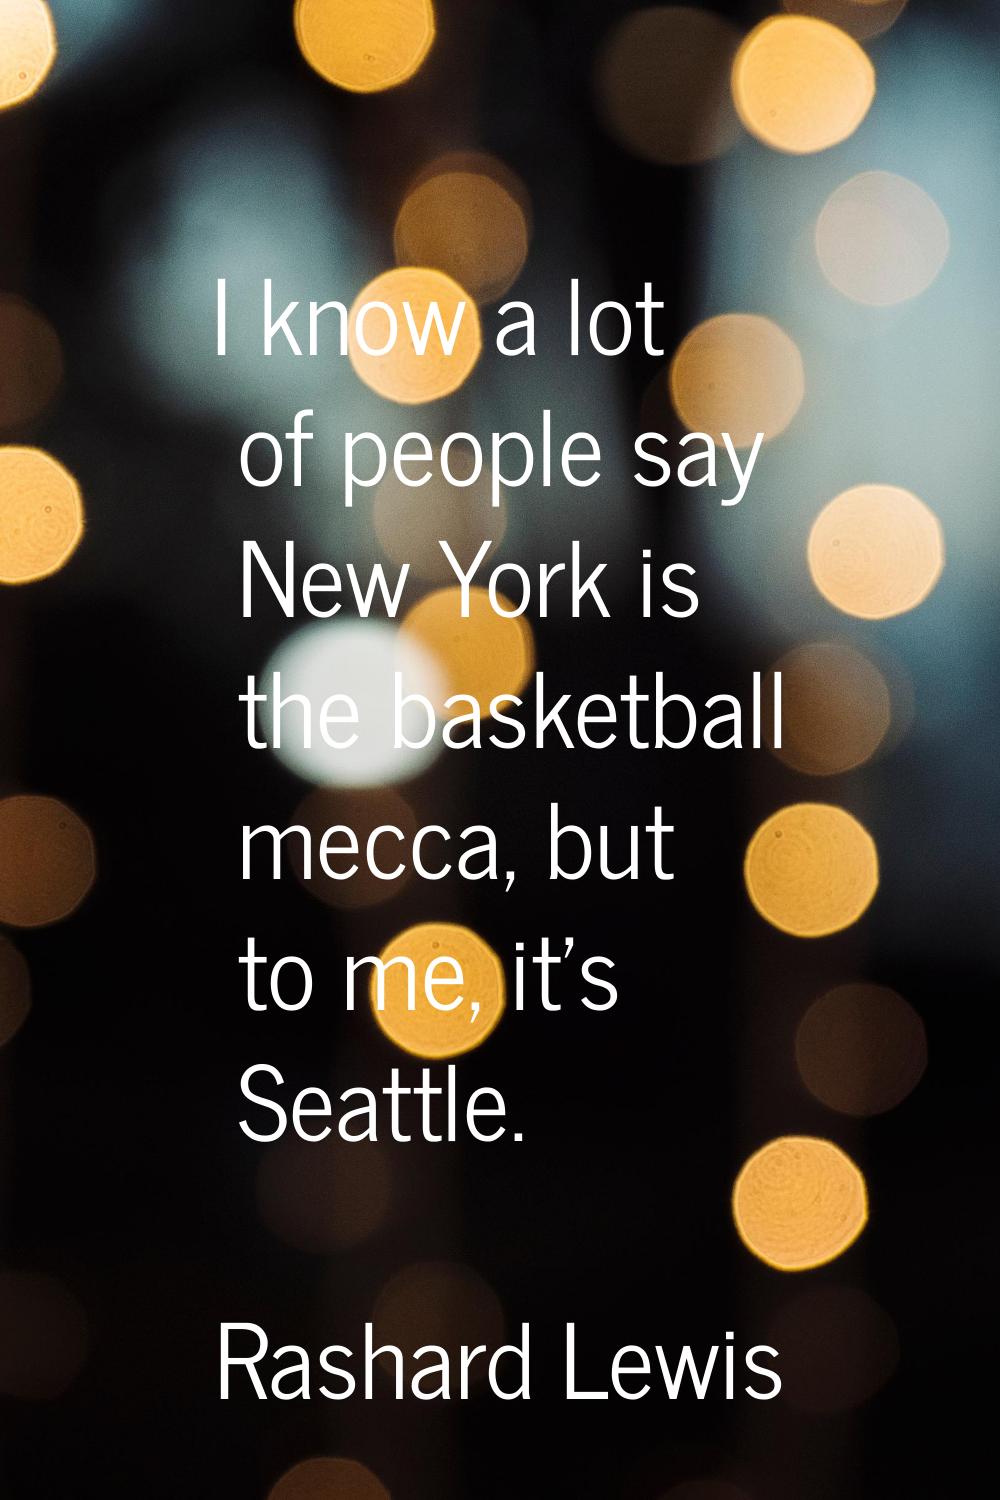 I know a lot of people say New York is the basketball mecca, but to me, it's Seattle.